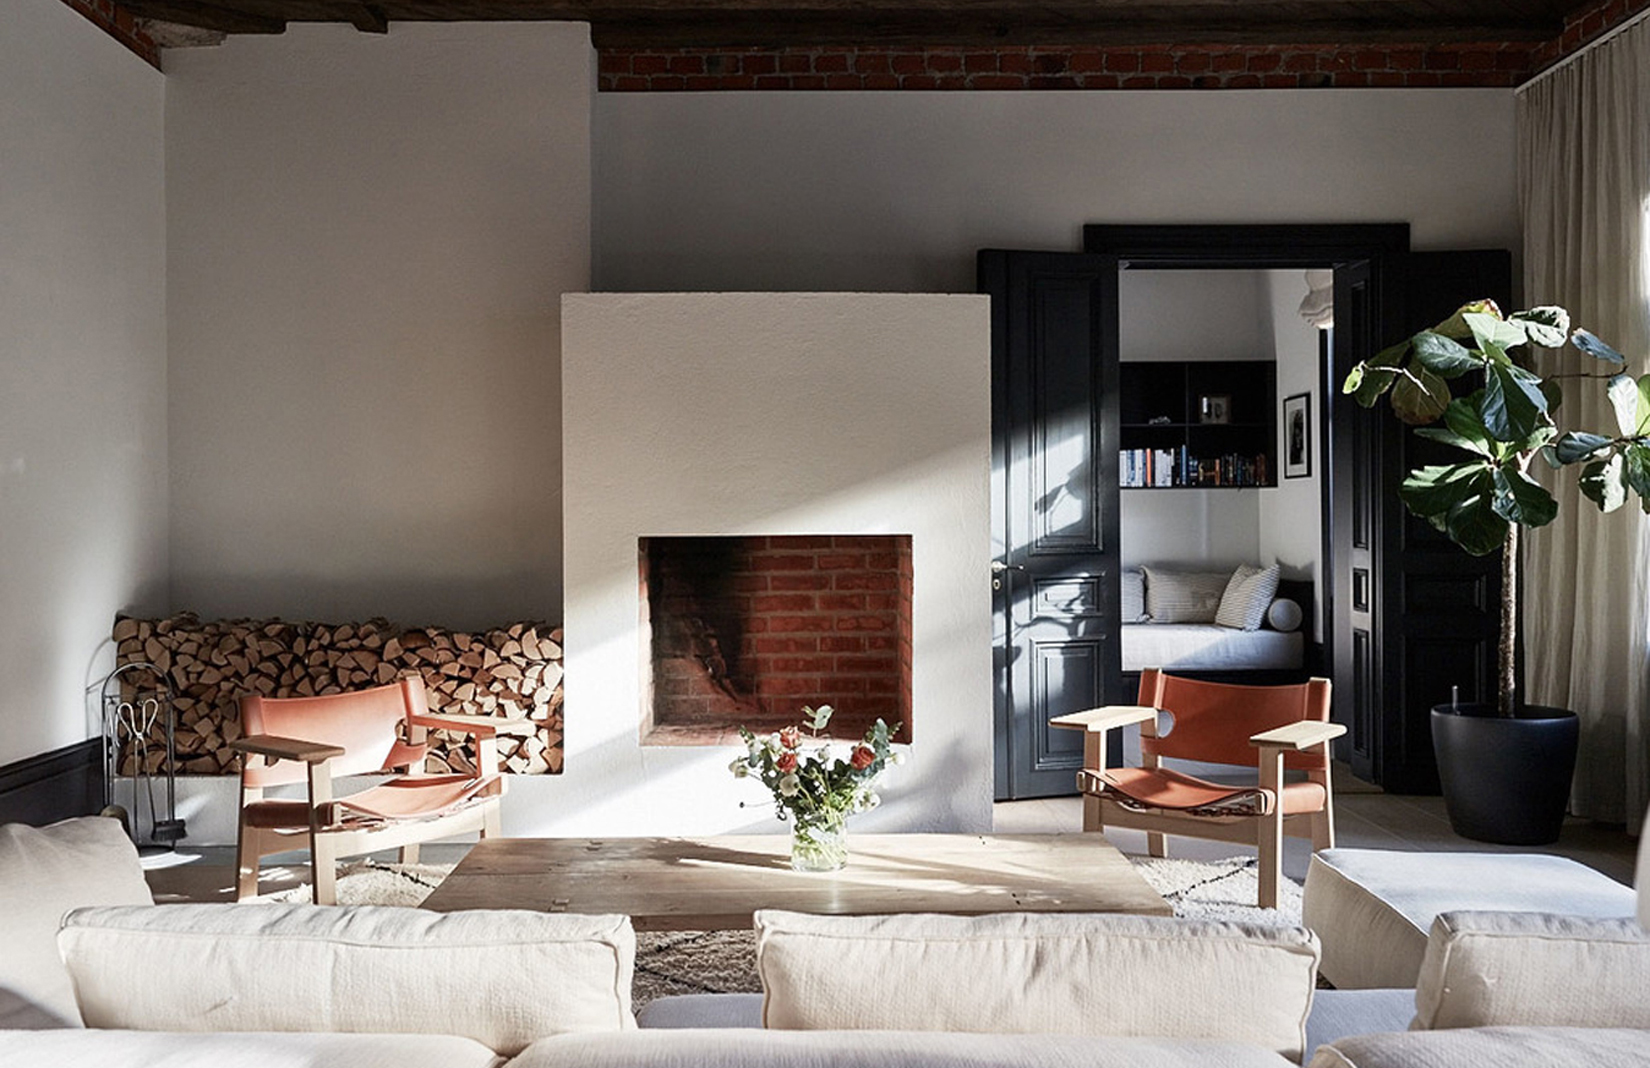 Property of the week: a Swedish fashion designer’s former attic home ...